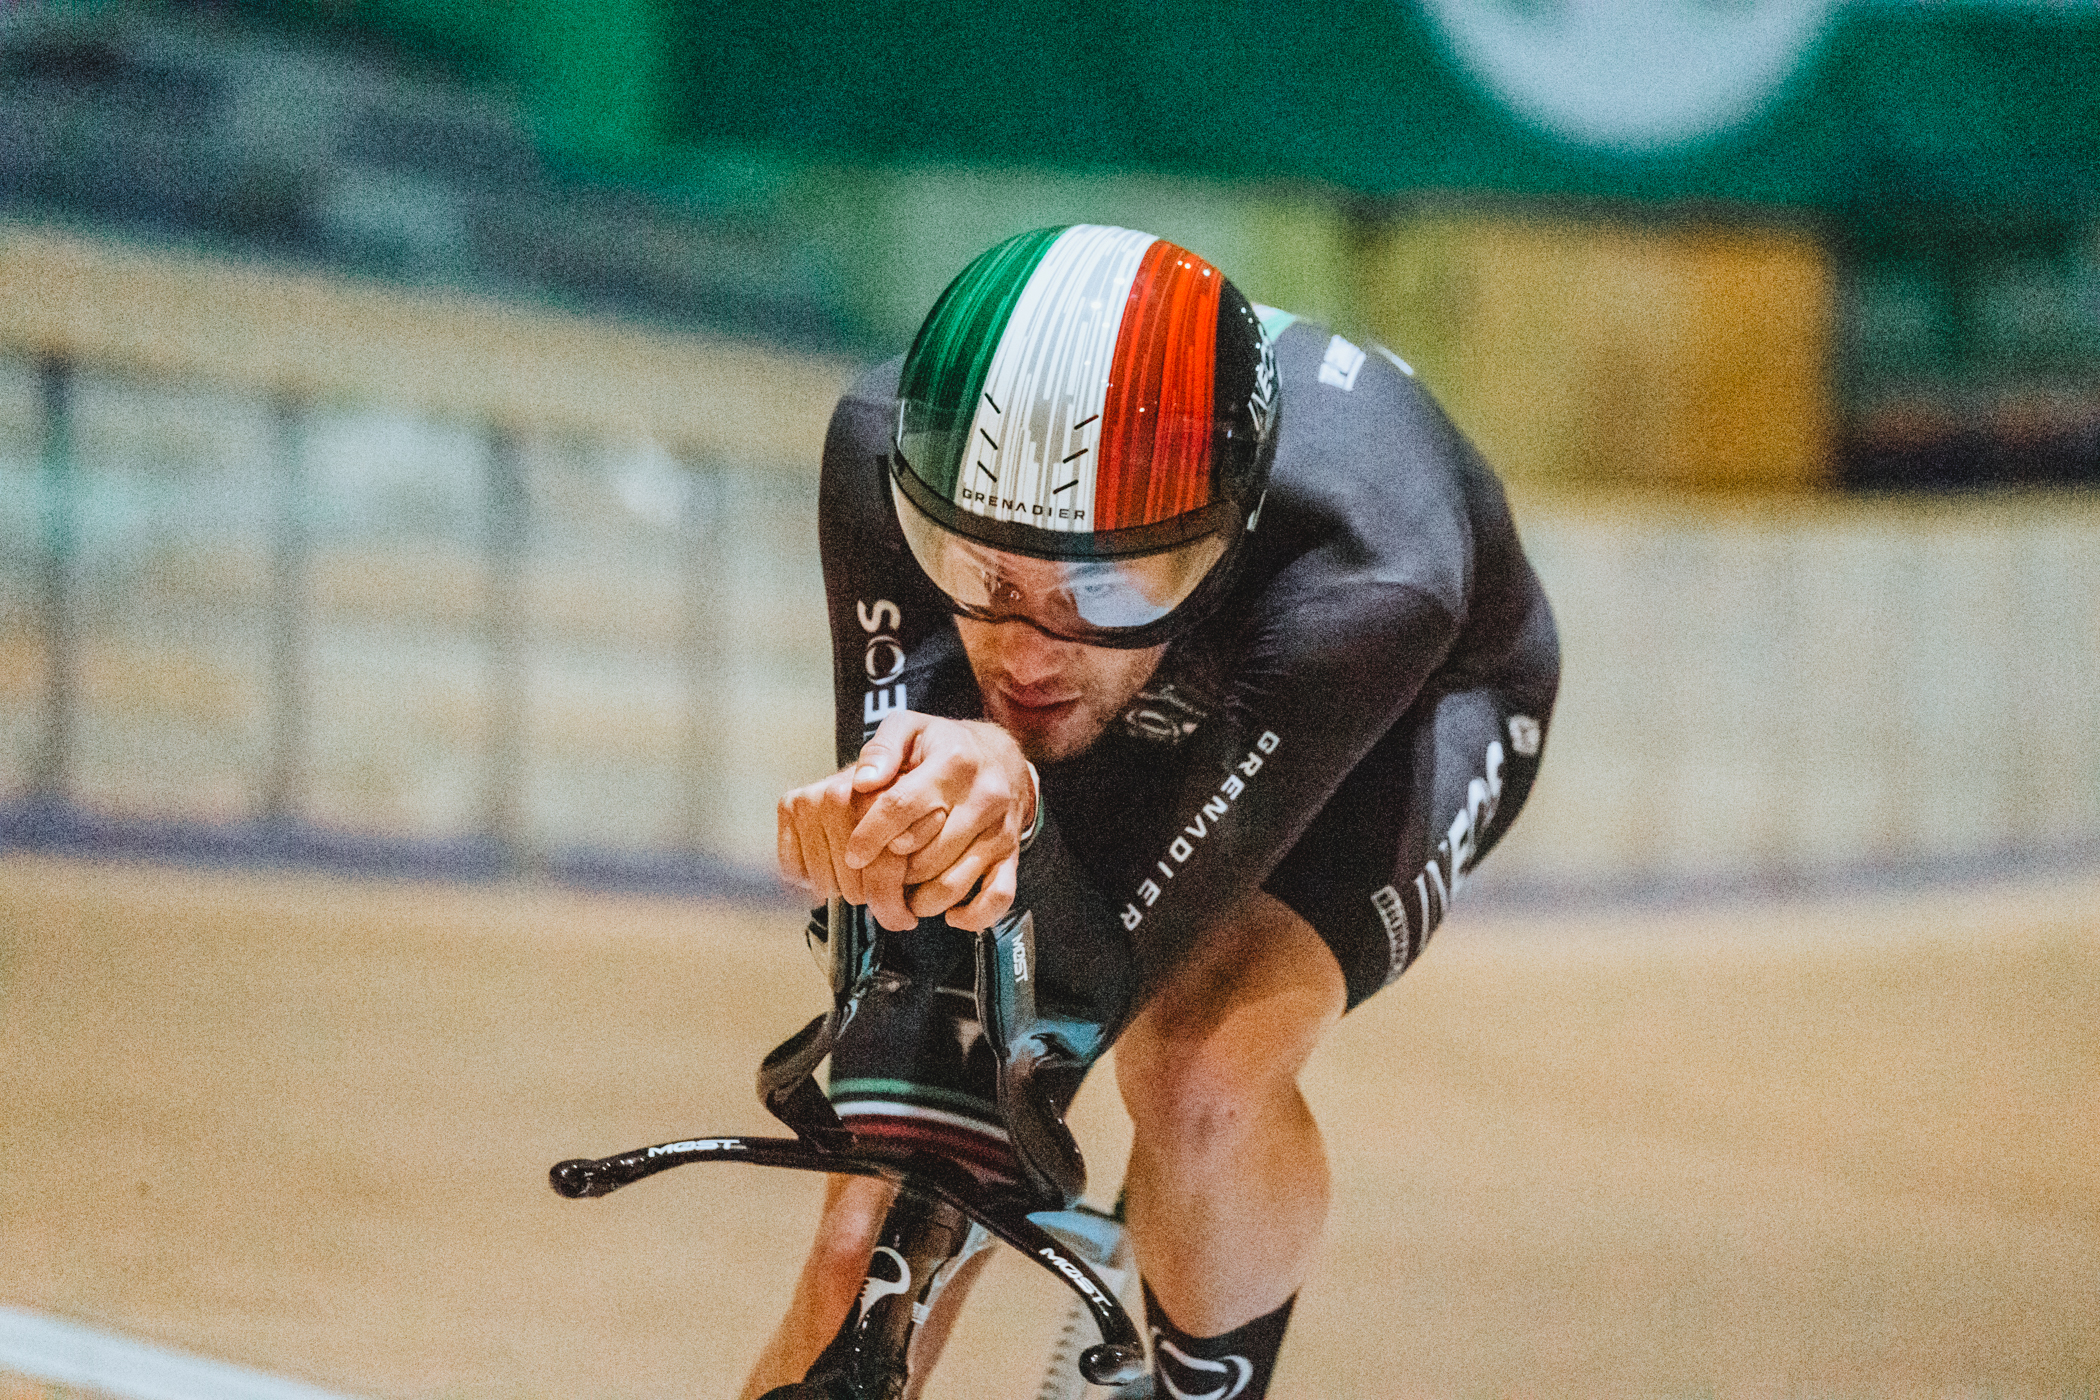 Hour Record attempt by Filippo Ganna streaming live now Cyclingnews